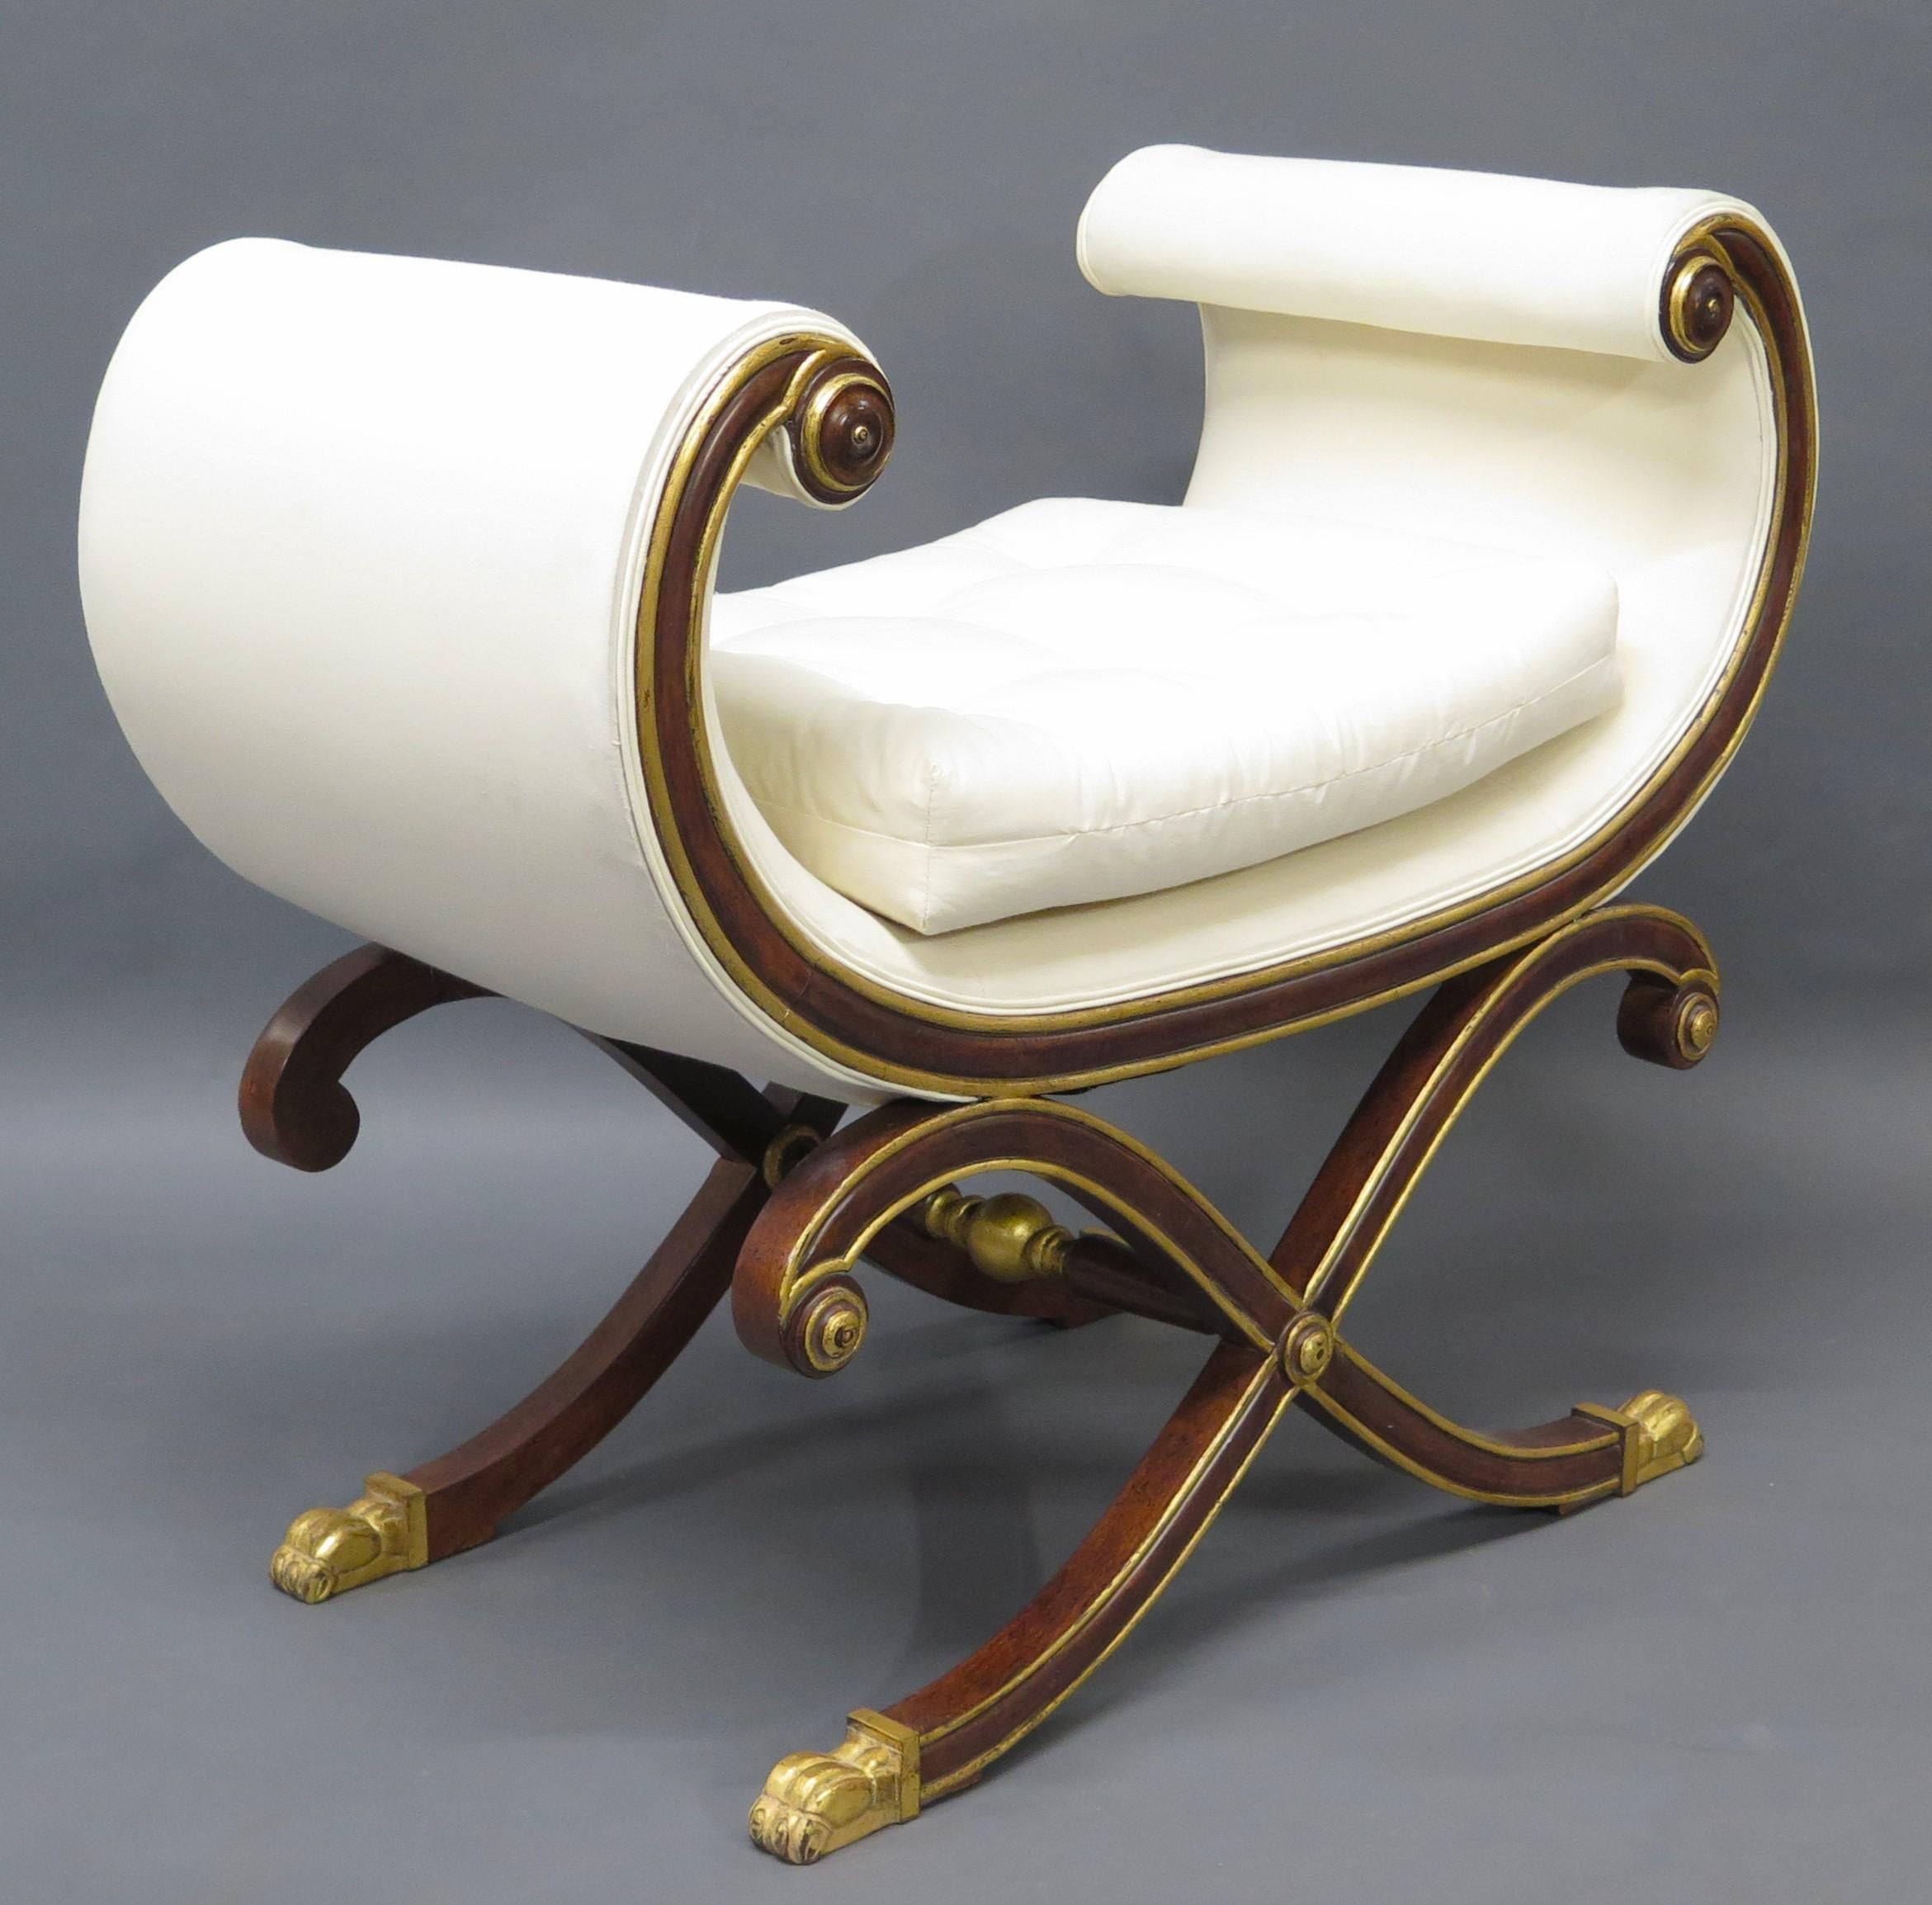 1920s scroll side bench / stool, window seat,  tall rolled sides, French Empire Style, with gilt wood trim. tufted cushion. French, 20th century